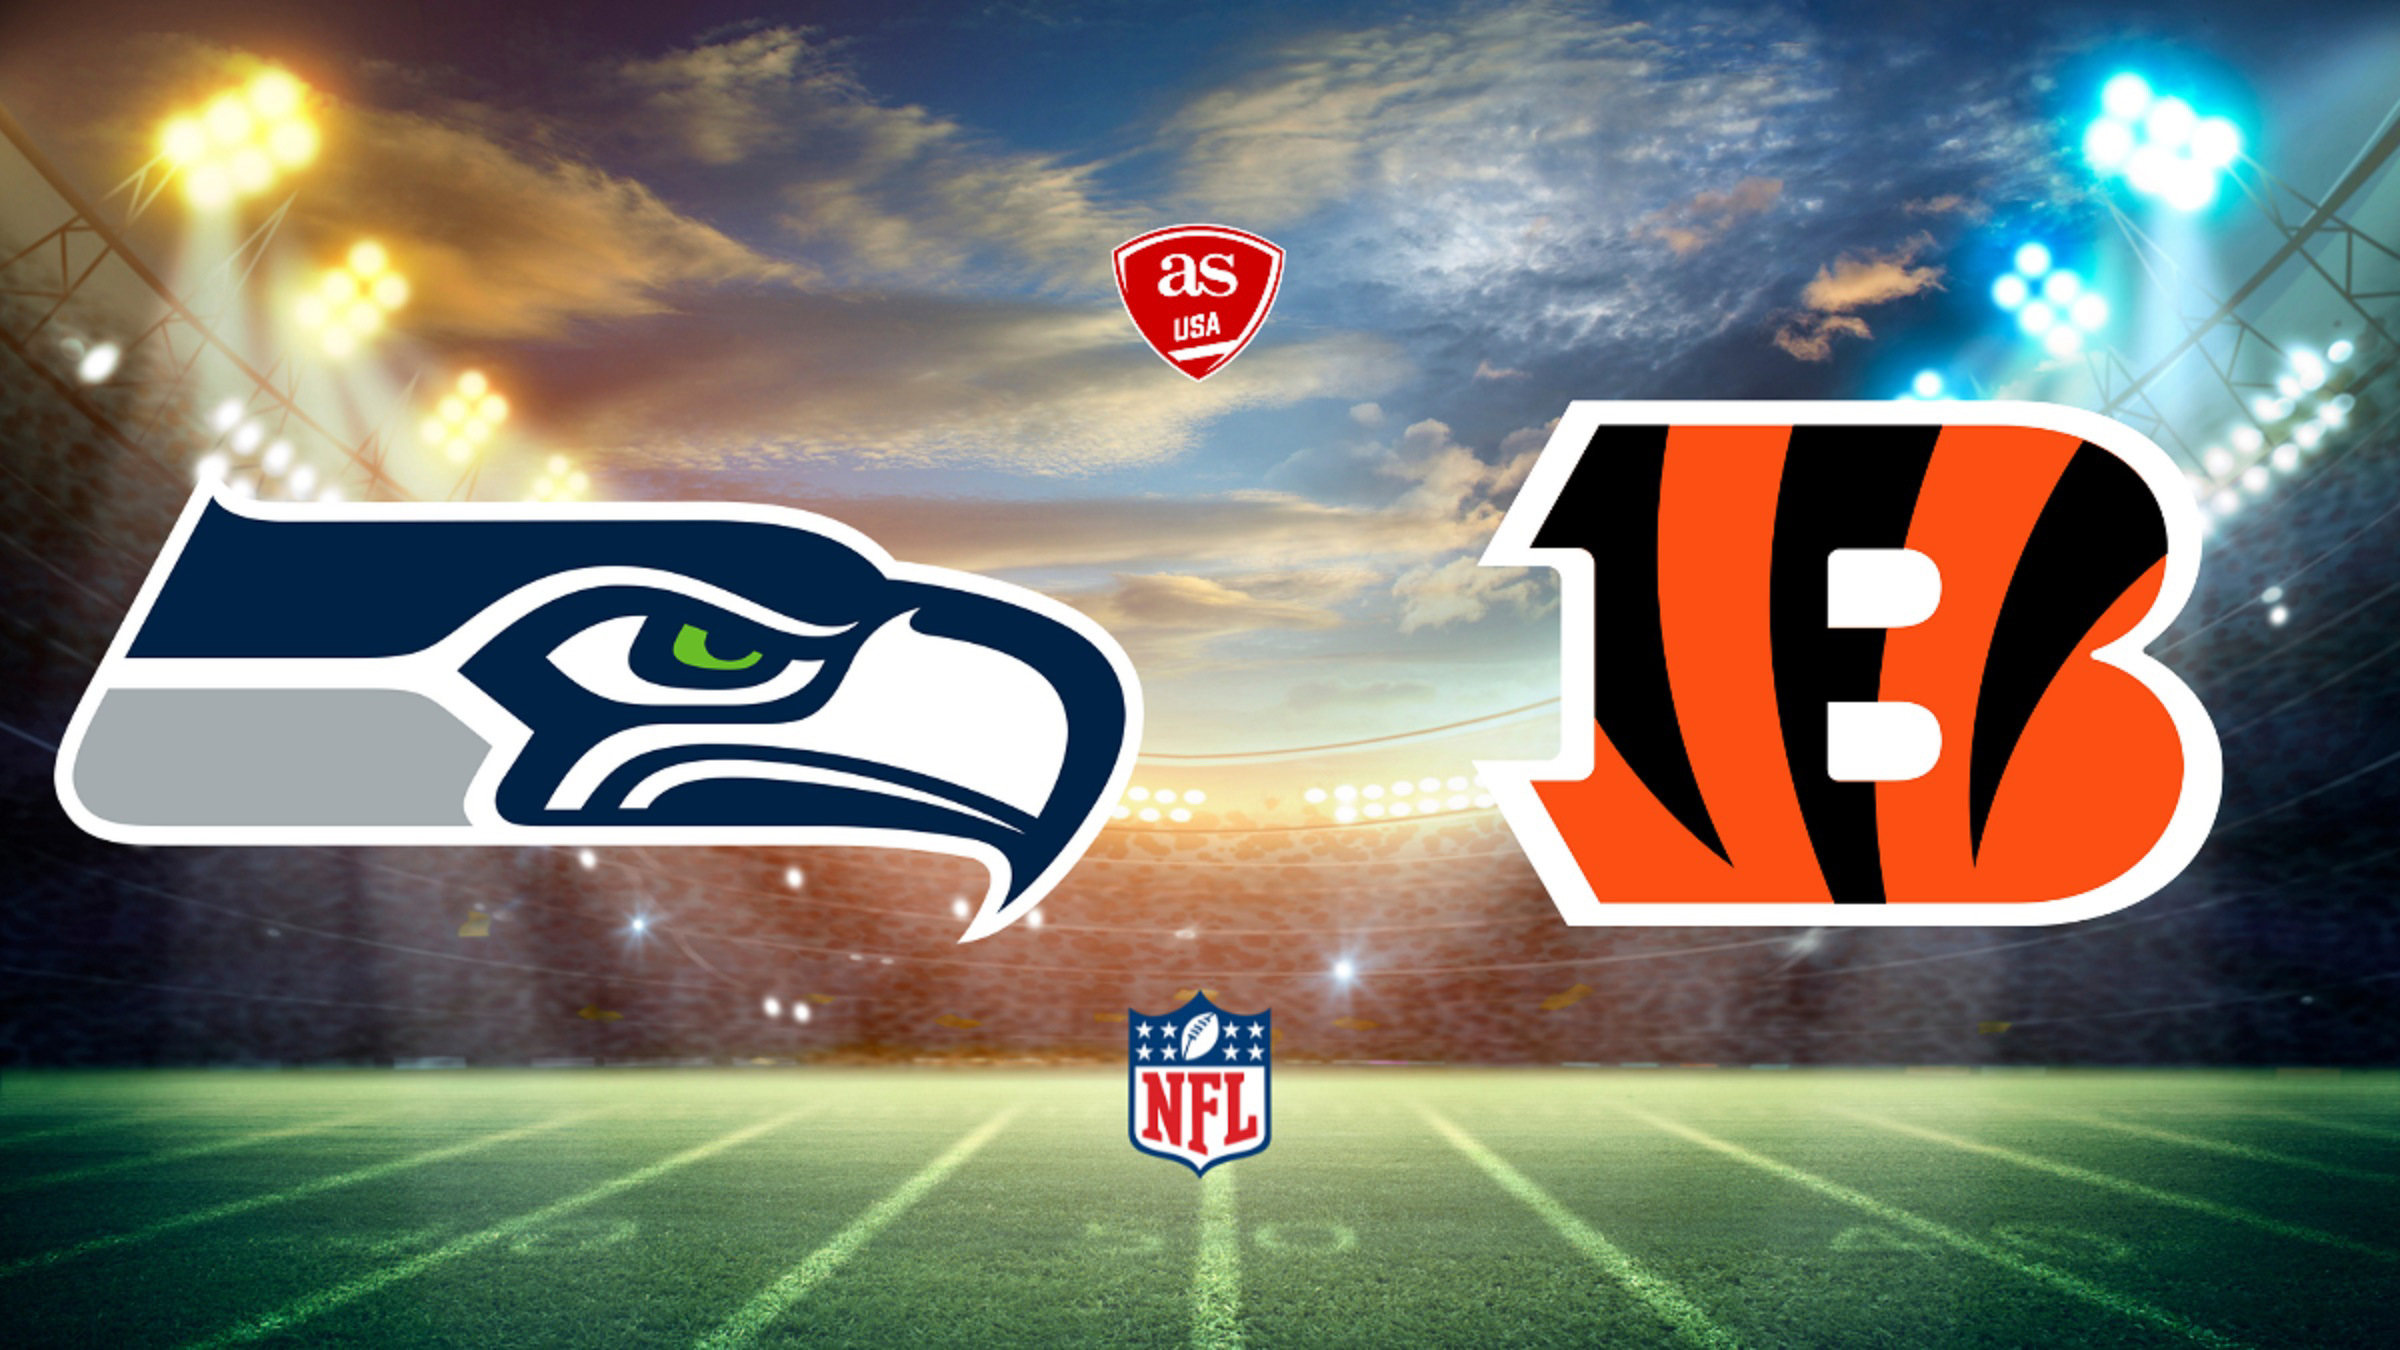 Seattle Seahawks vs Cincinnati Bengals times, how to watch on TV and